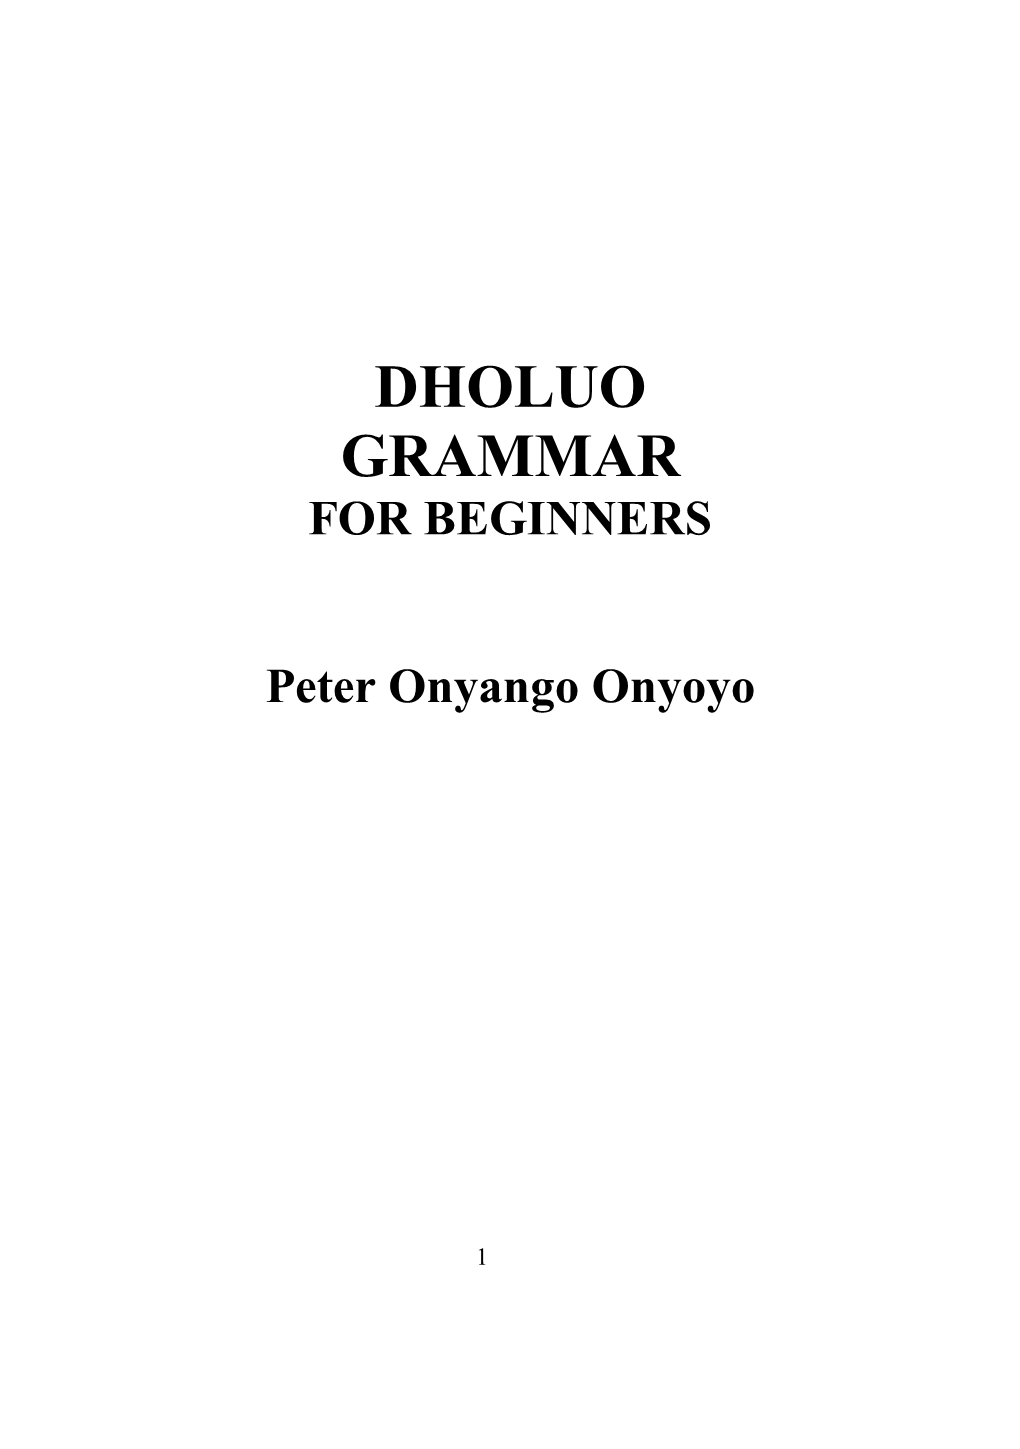 Dholuo Grammar for Beginners